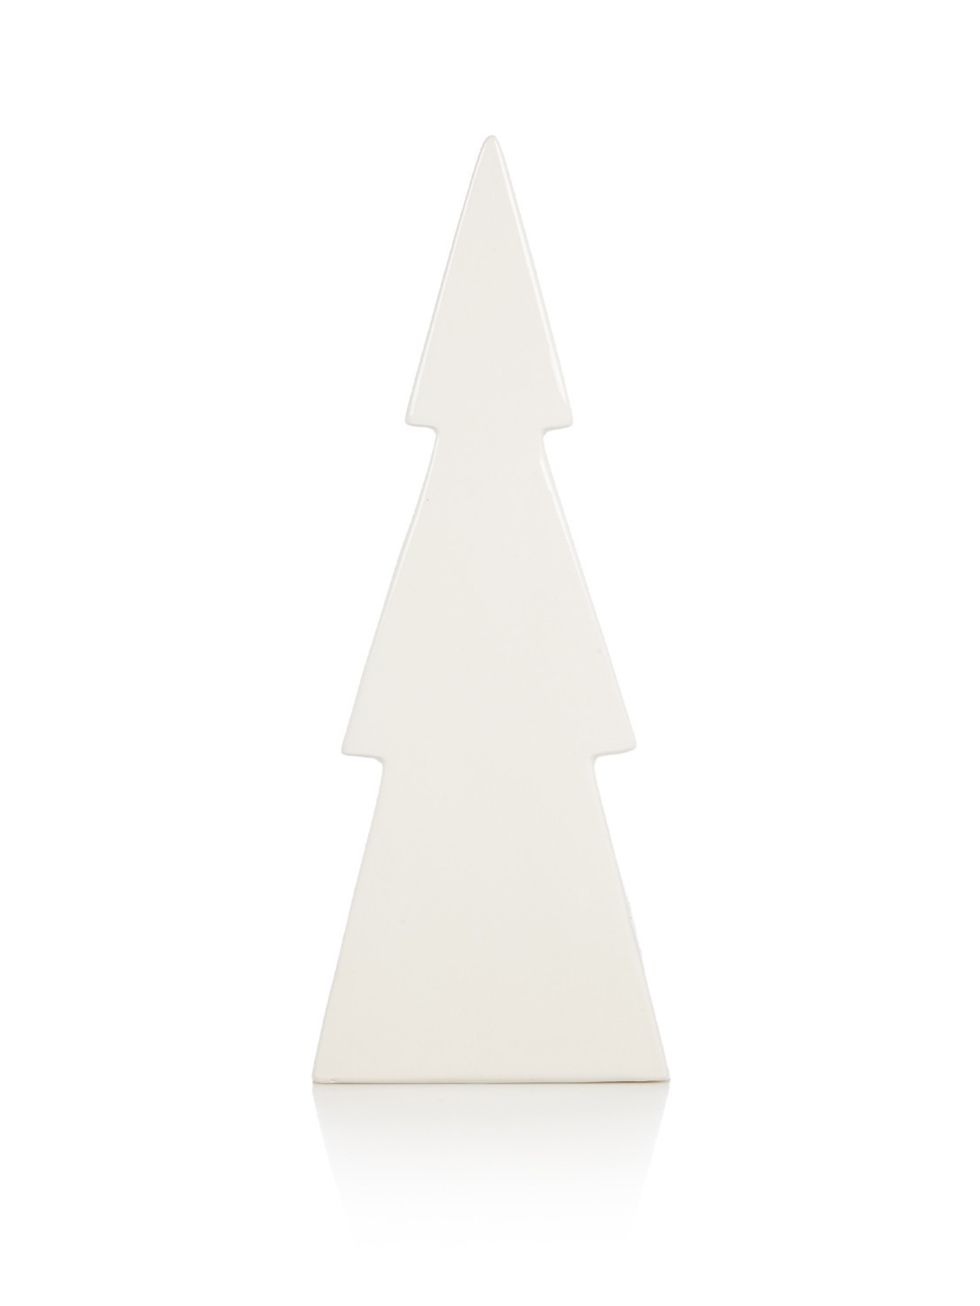 White, Cone, Grey, Beige, Triangle, Paper, Silver, Steeple, Still life photography, 